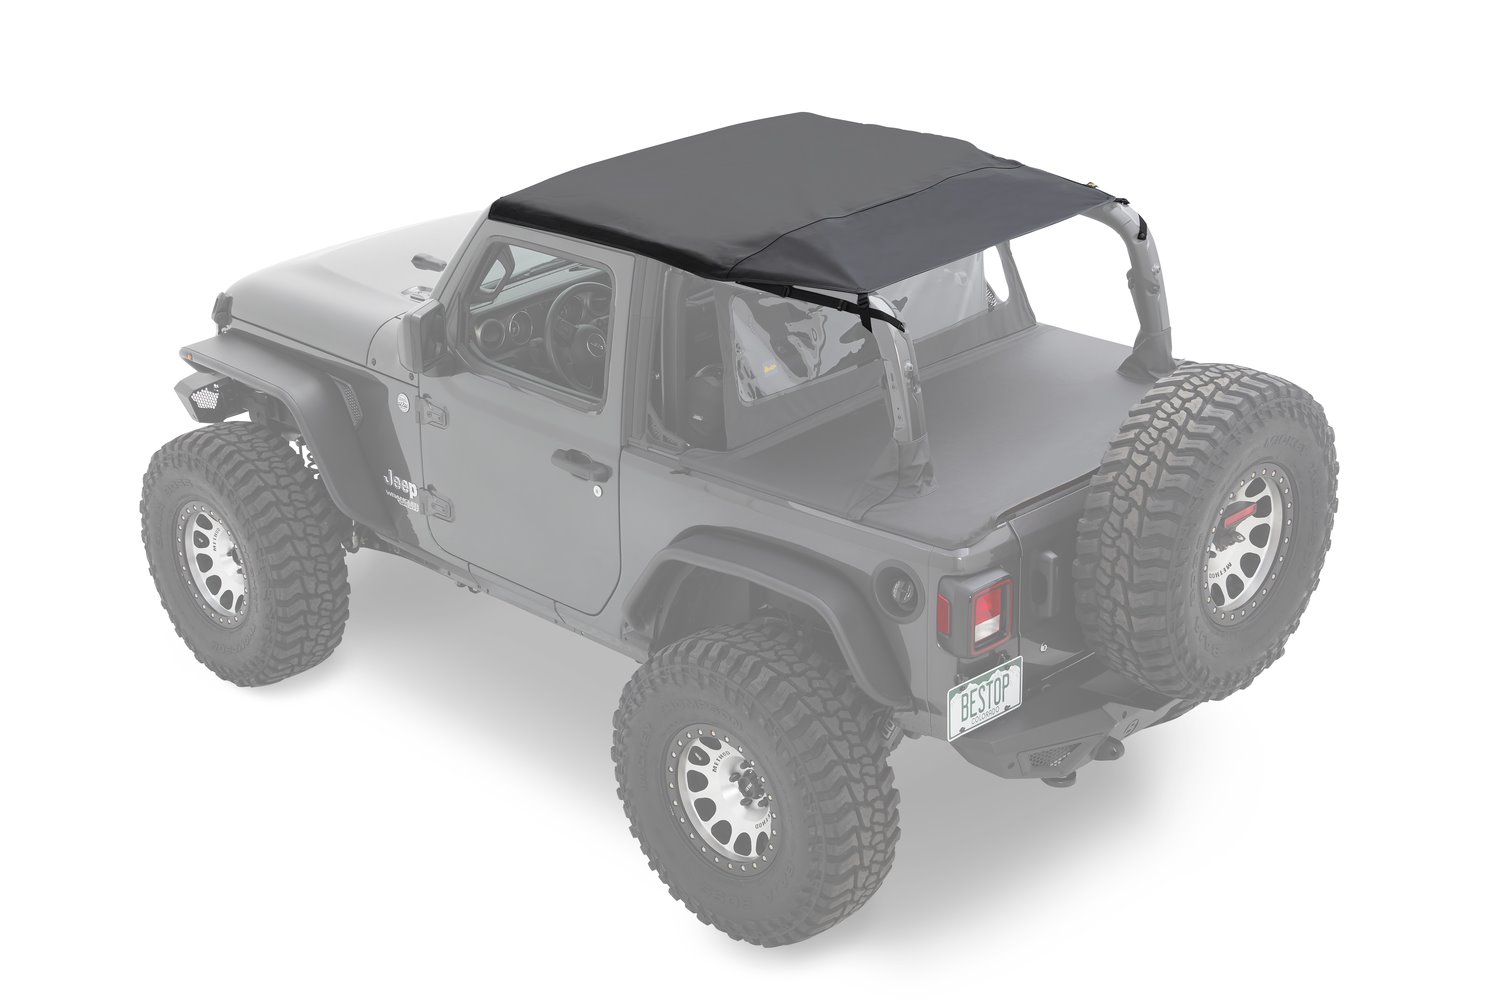 Header Extended Safari Cable Style Bikini Top, Black Diamond, Incl. Windshield Header, Requires Soft Top Door Surrounds,